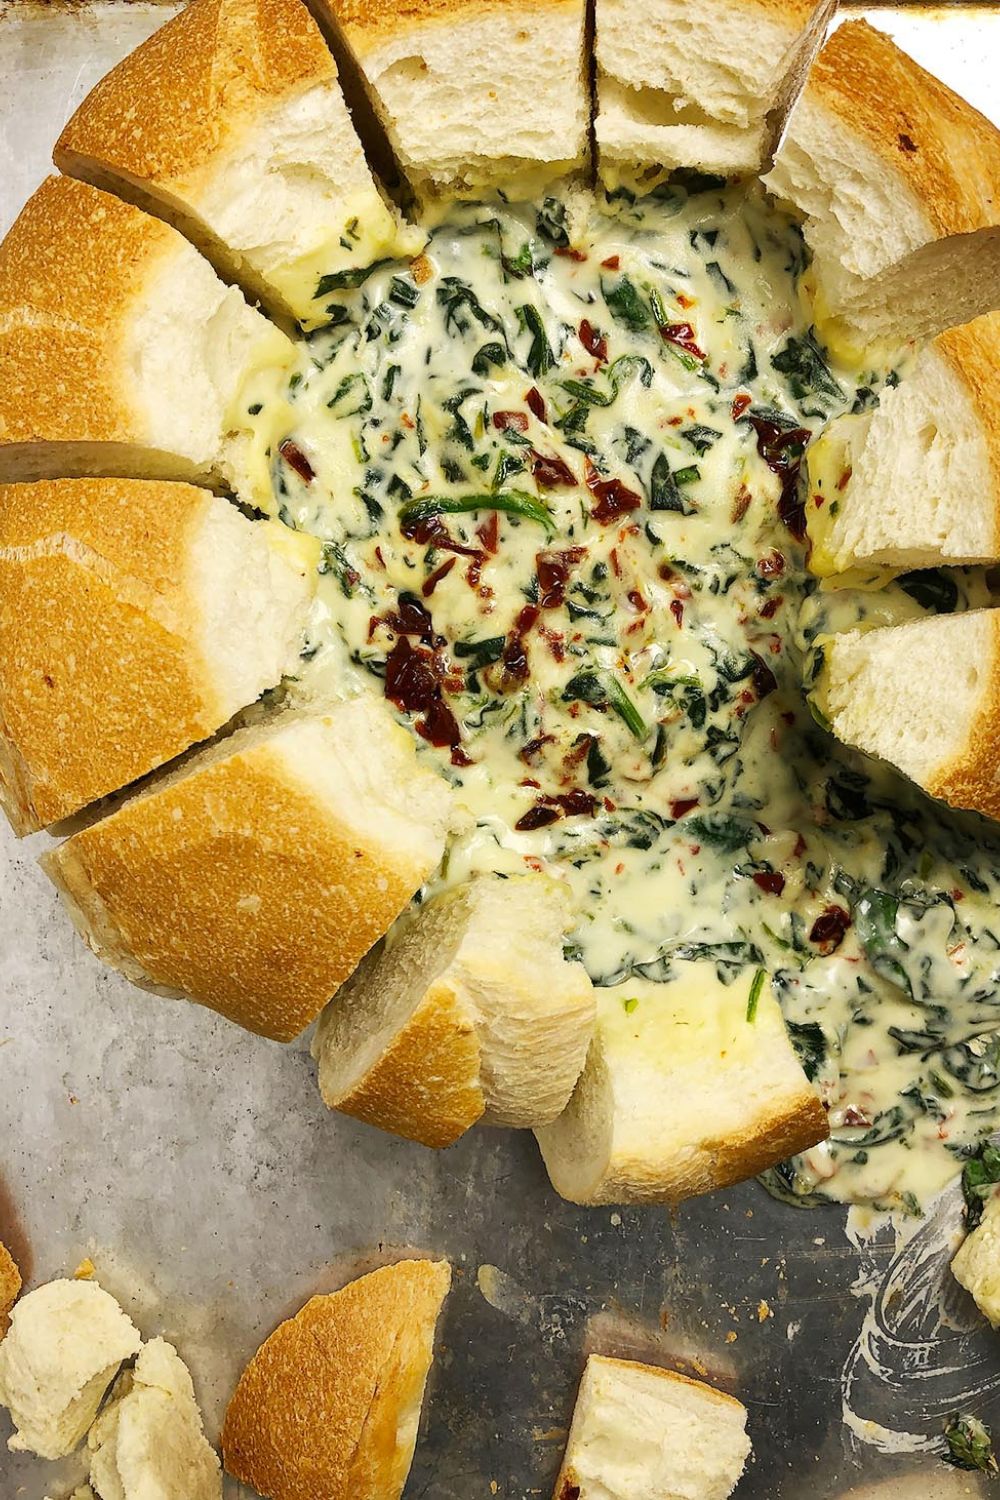 Top-down view of Hot Spinach dip in a bread bowl